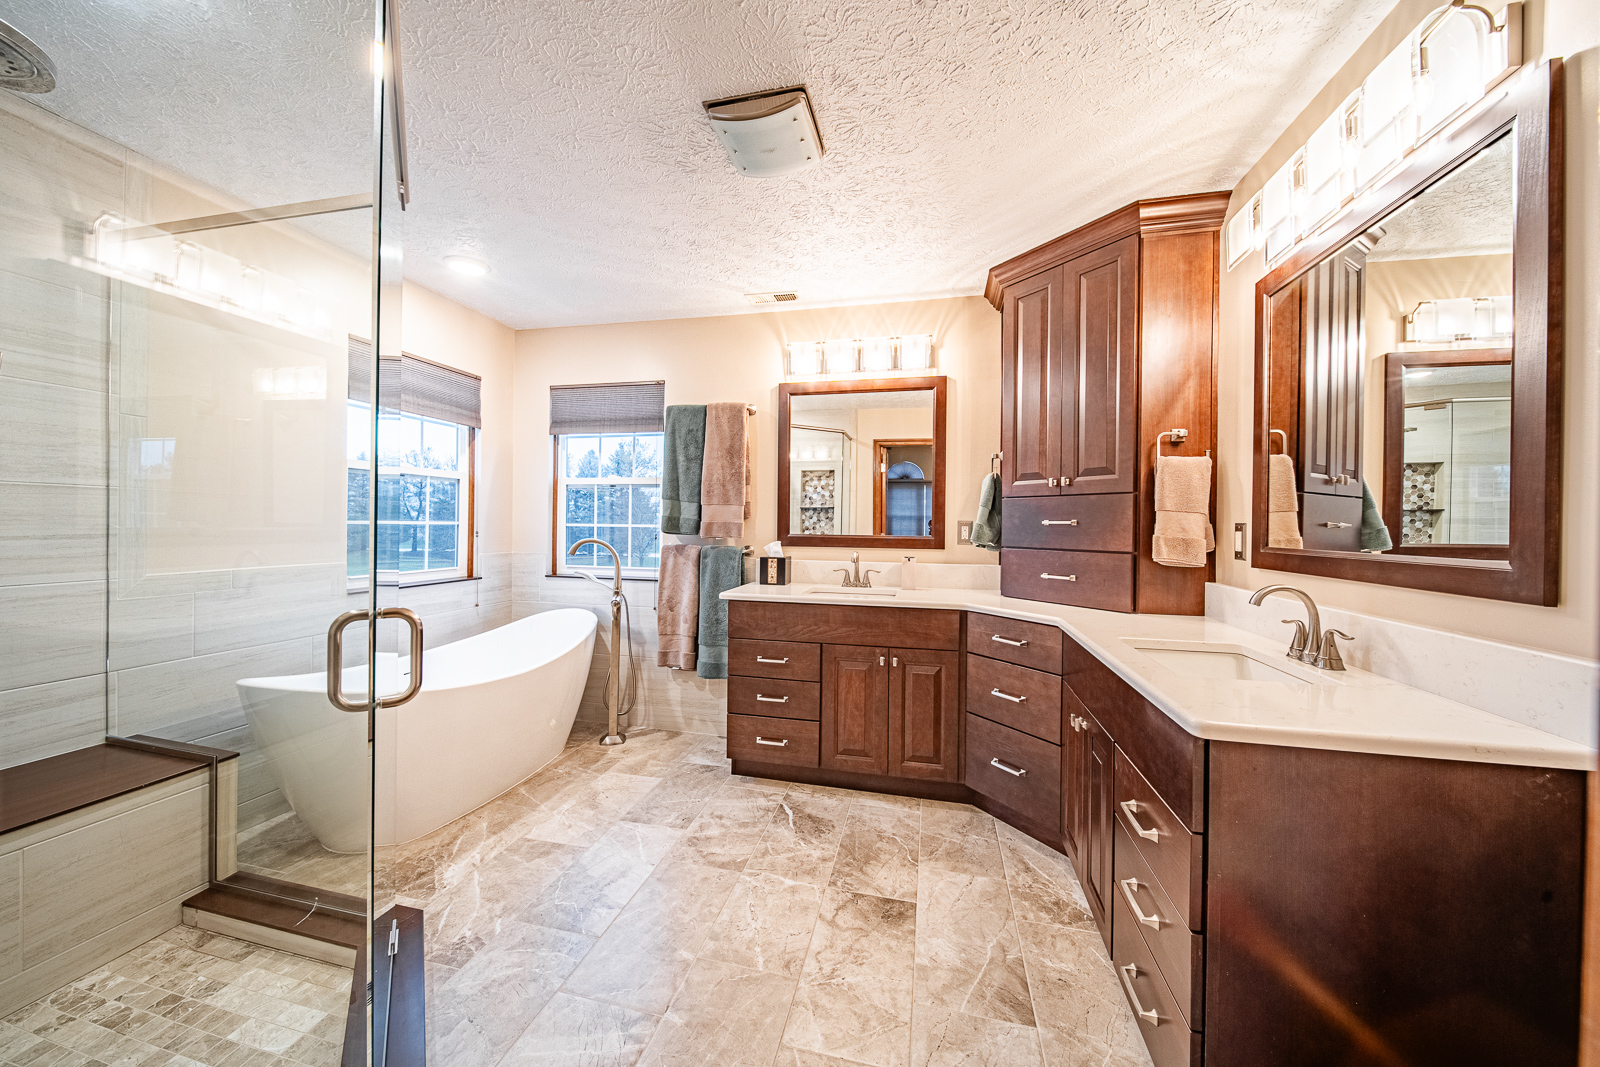 Lafayette bathroom makeover, bringing the style from the 80s to the 2020s with elegant fixtures.